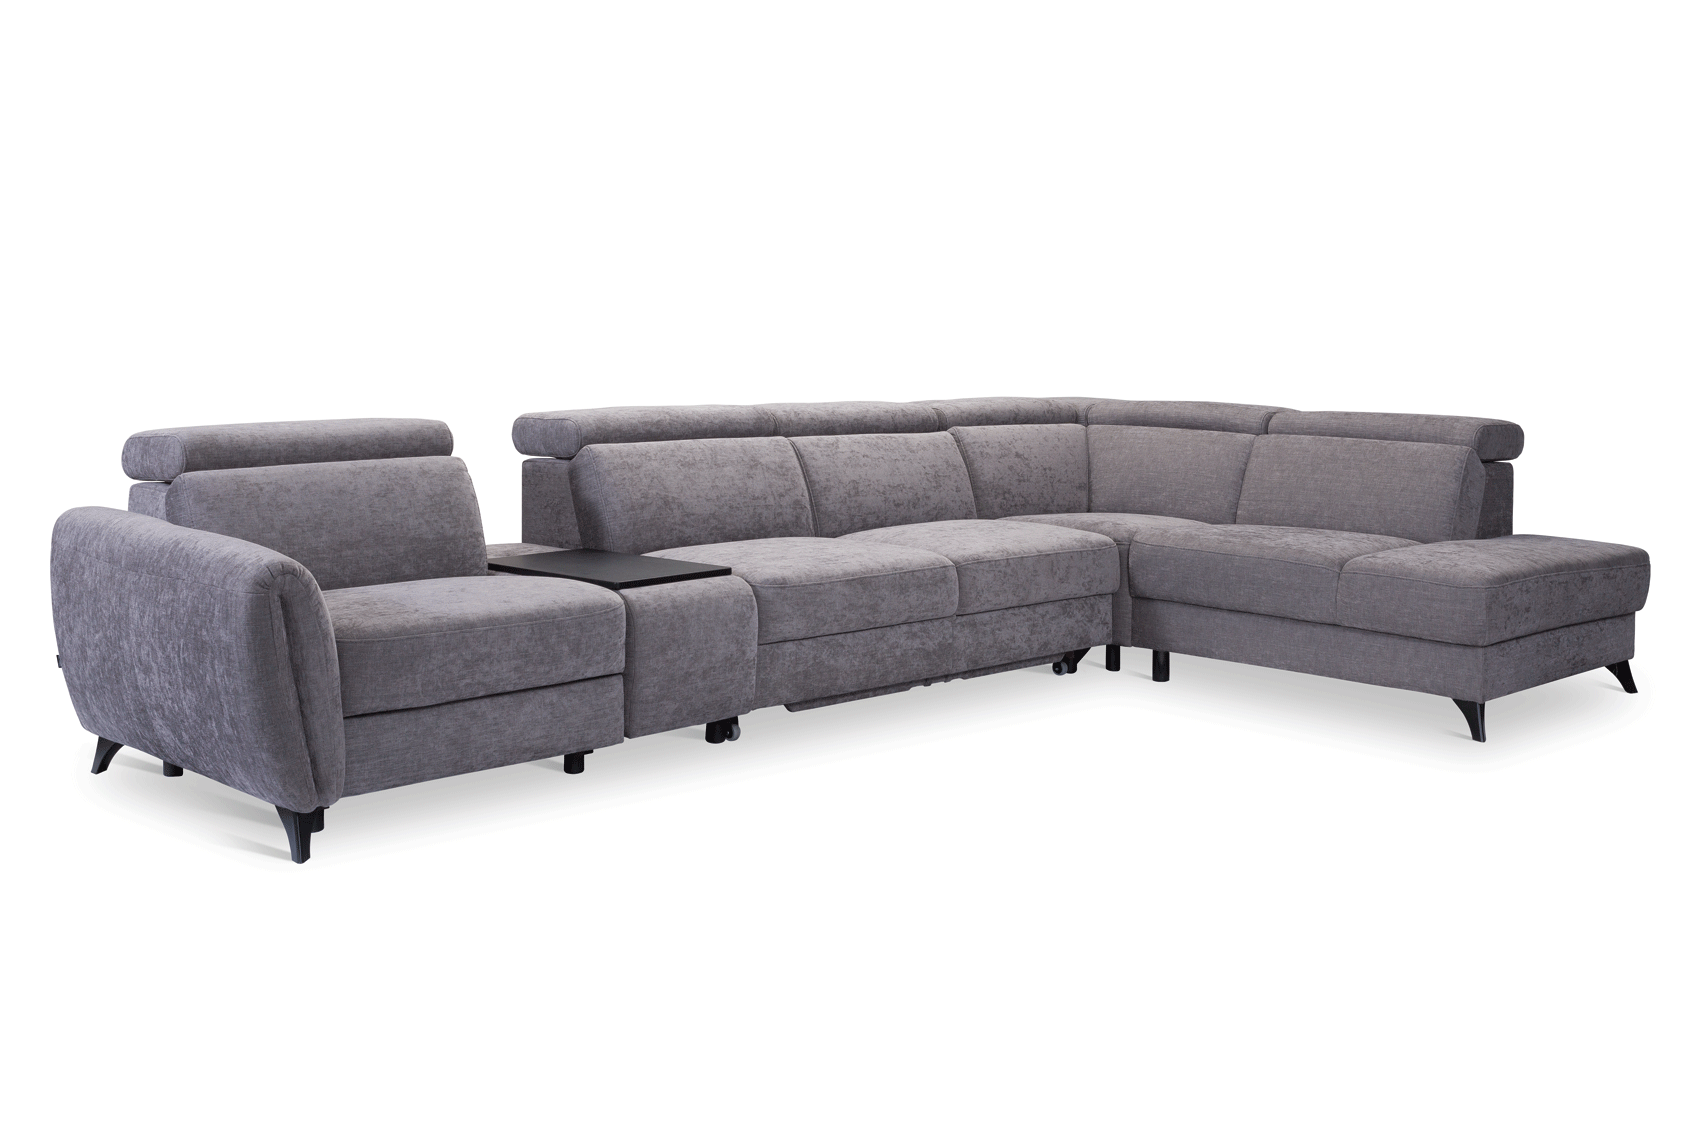 Living Room Furniture Sectionals Lorens Sectional w/recliner, bed, bar